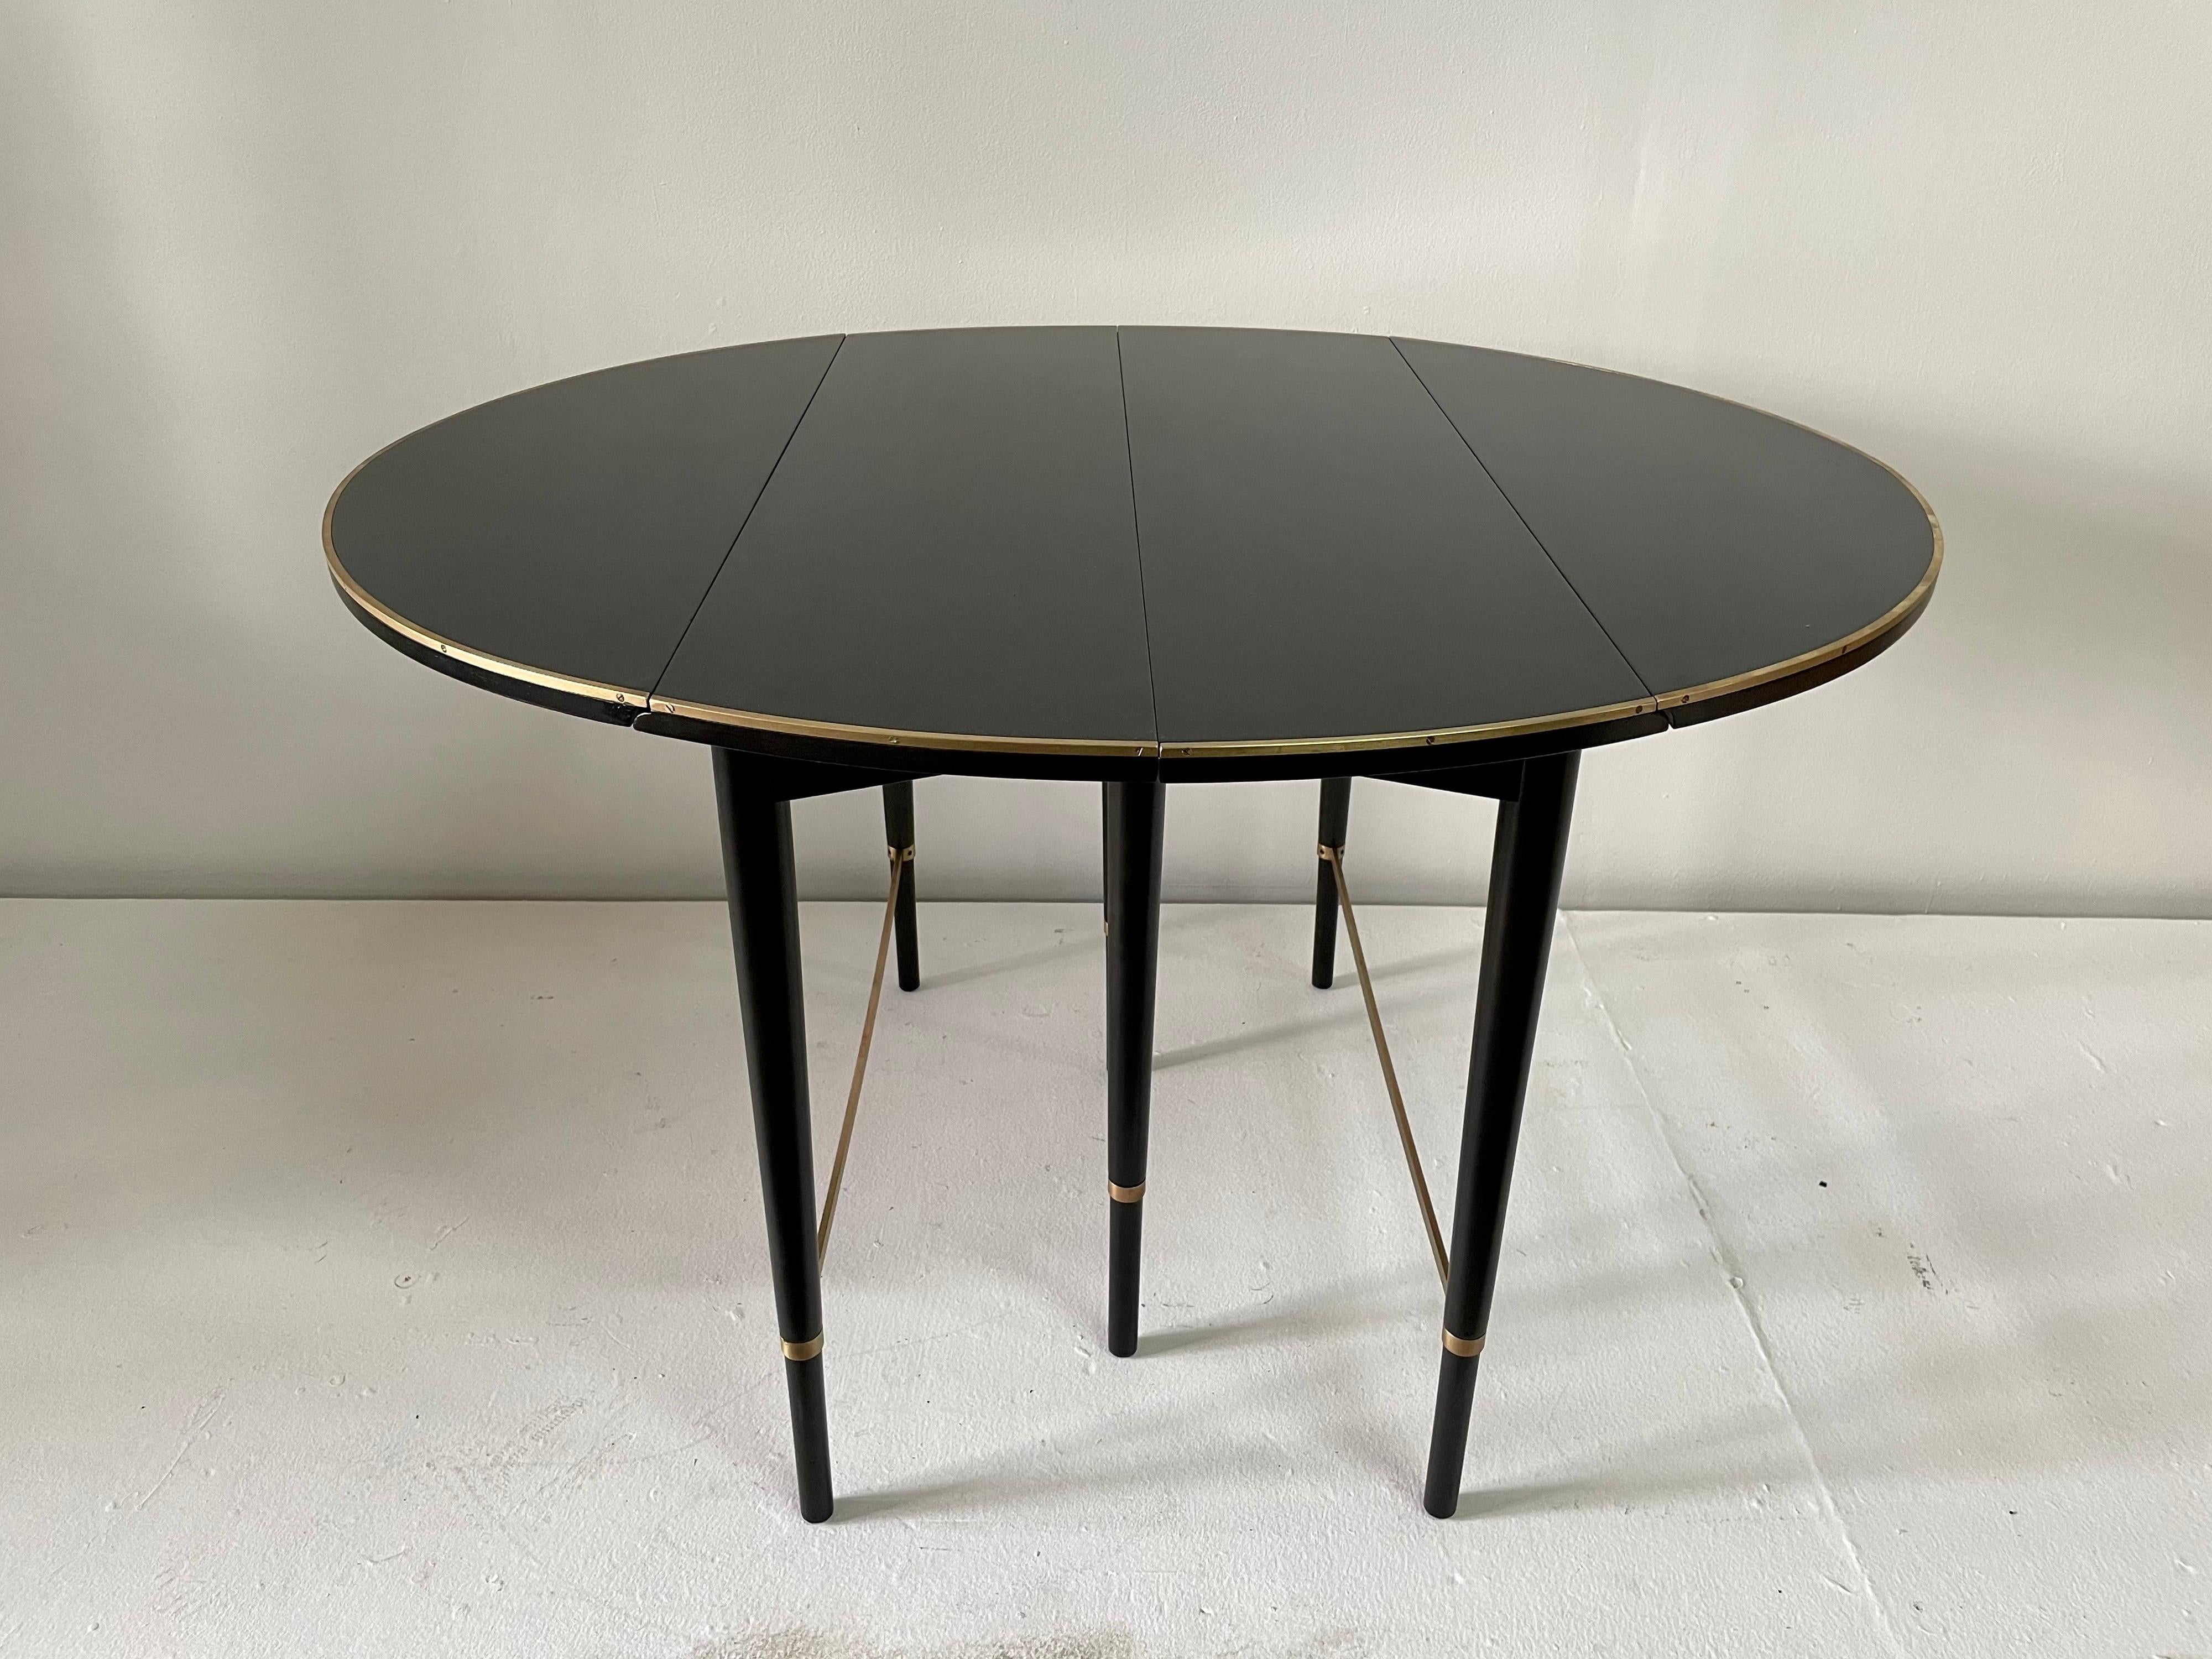 In exceptional vintage condition this 4 leaf extendable ebonized mahogany dining table with brass stretchers and trim is designed by Paul McCobb for H. Sacks & Sons 